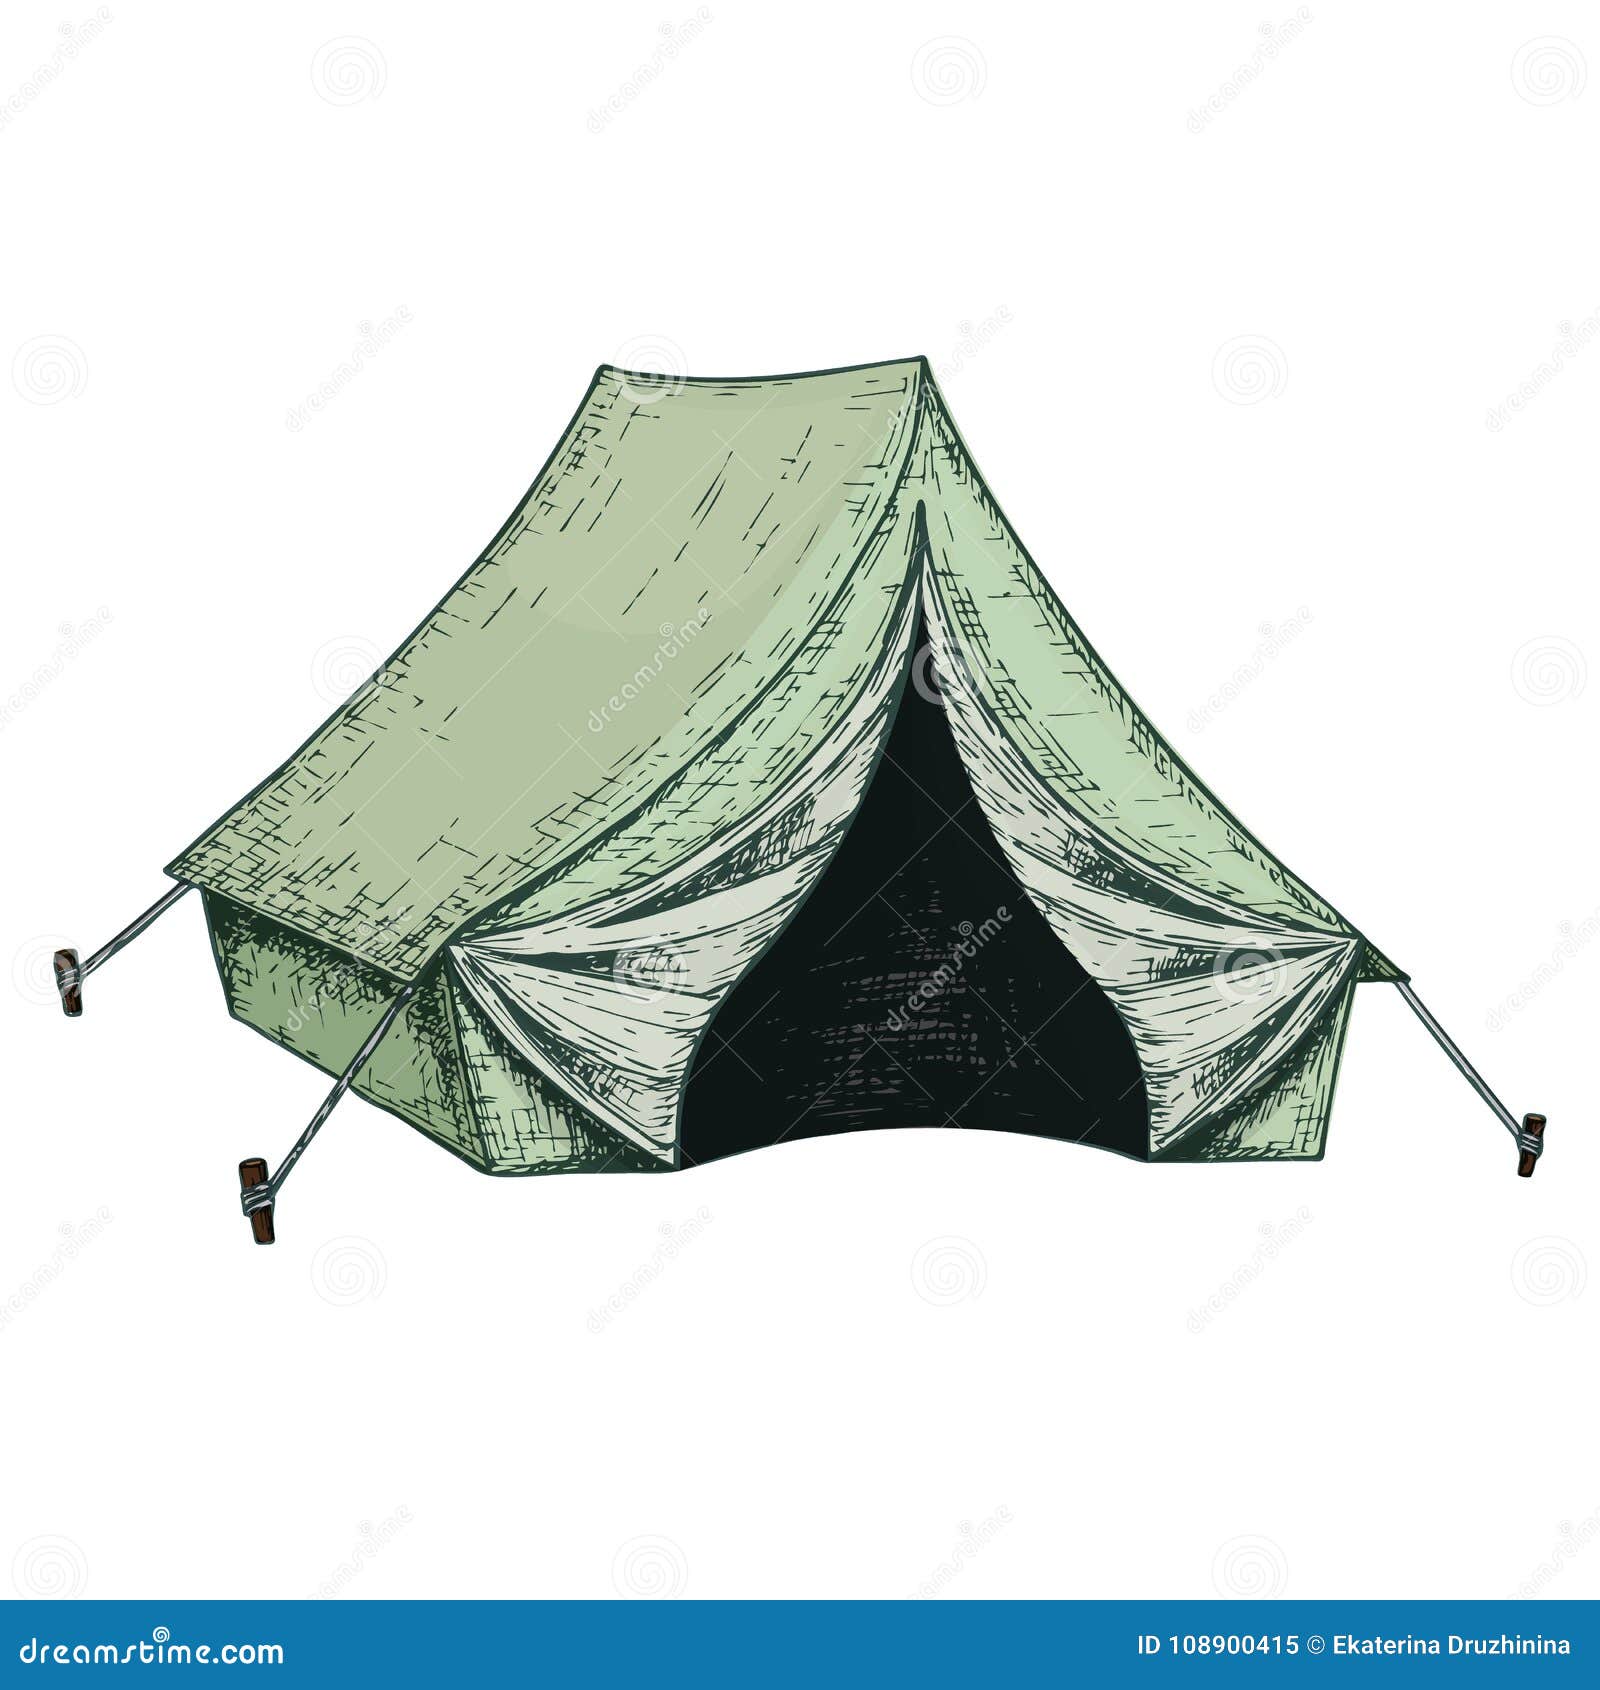 How to draw Camping Tent step by step - YouTube